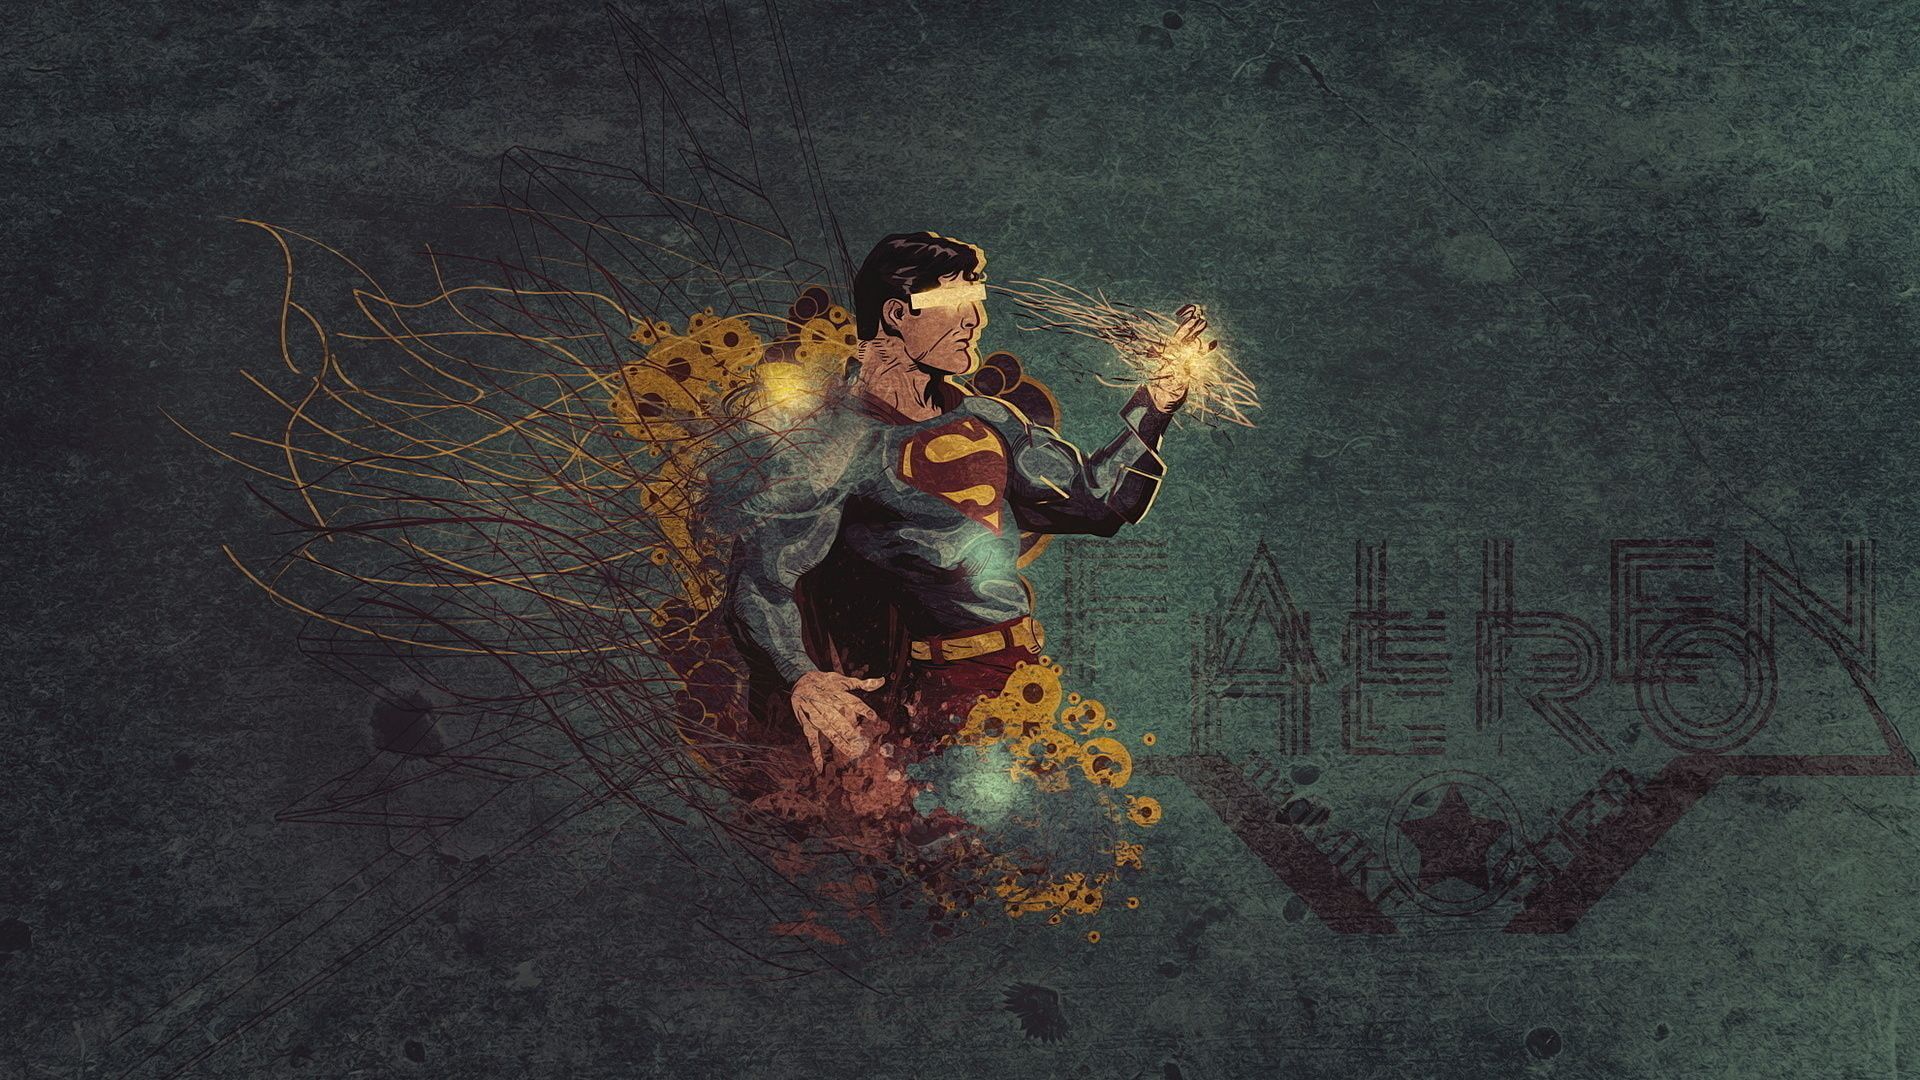 Superman 1920X1080, texture, textured, 1920x1080 HD Wallpaper and other